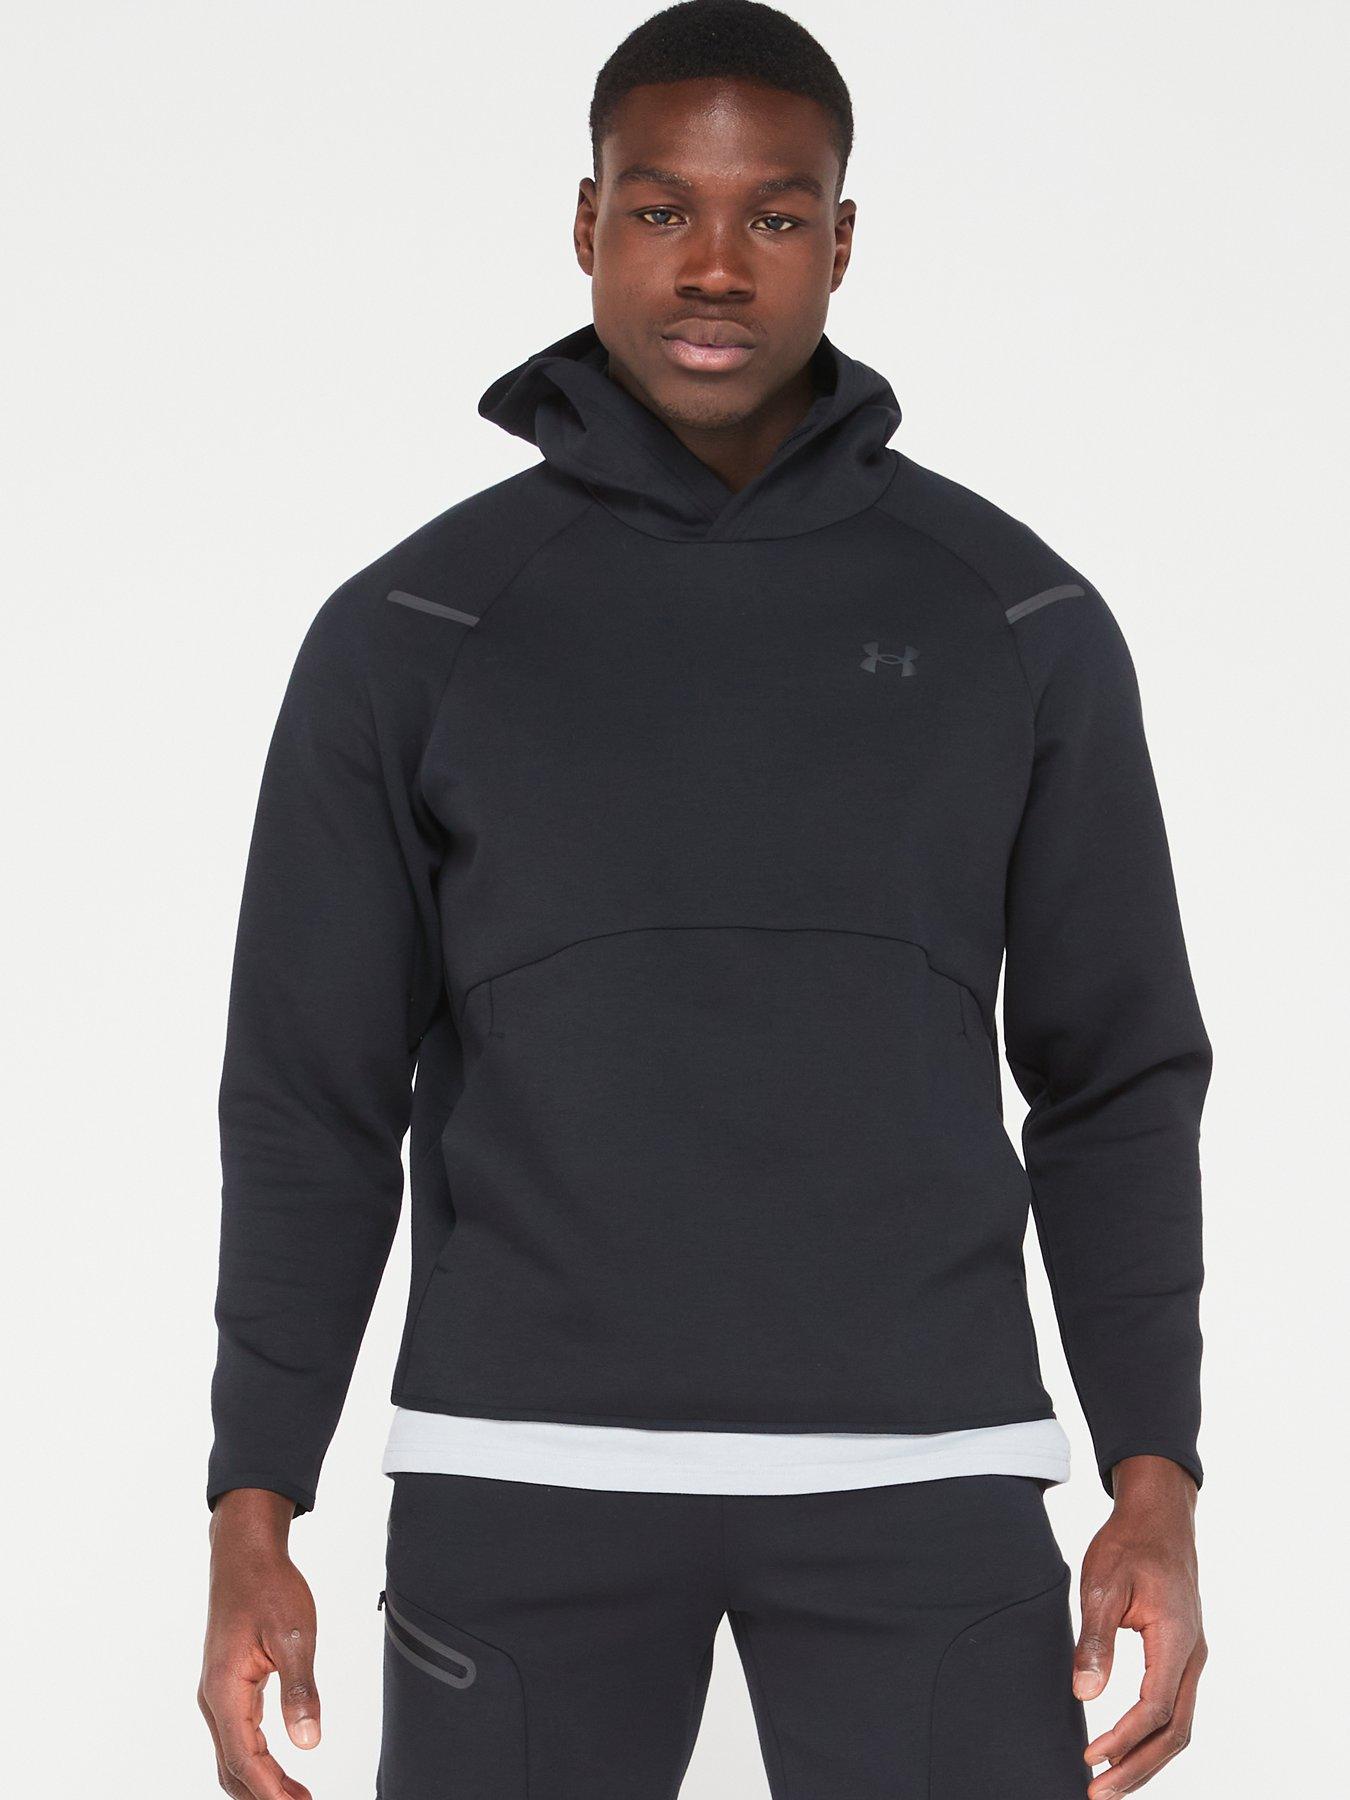 UNDER ARMOUR Mens Unstoppable Fleece Hoodie - Black